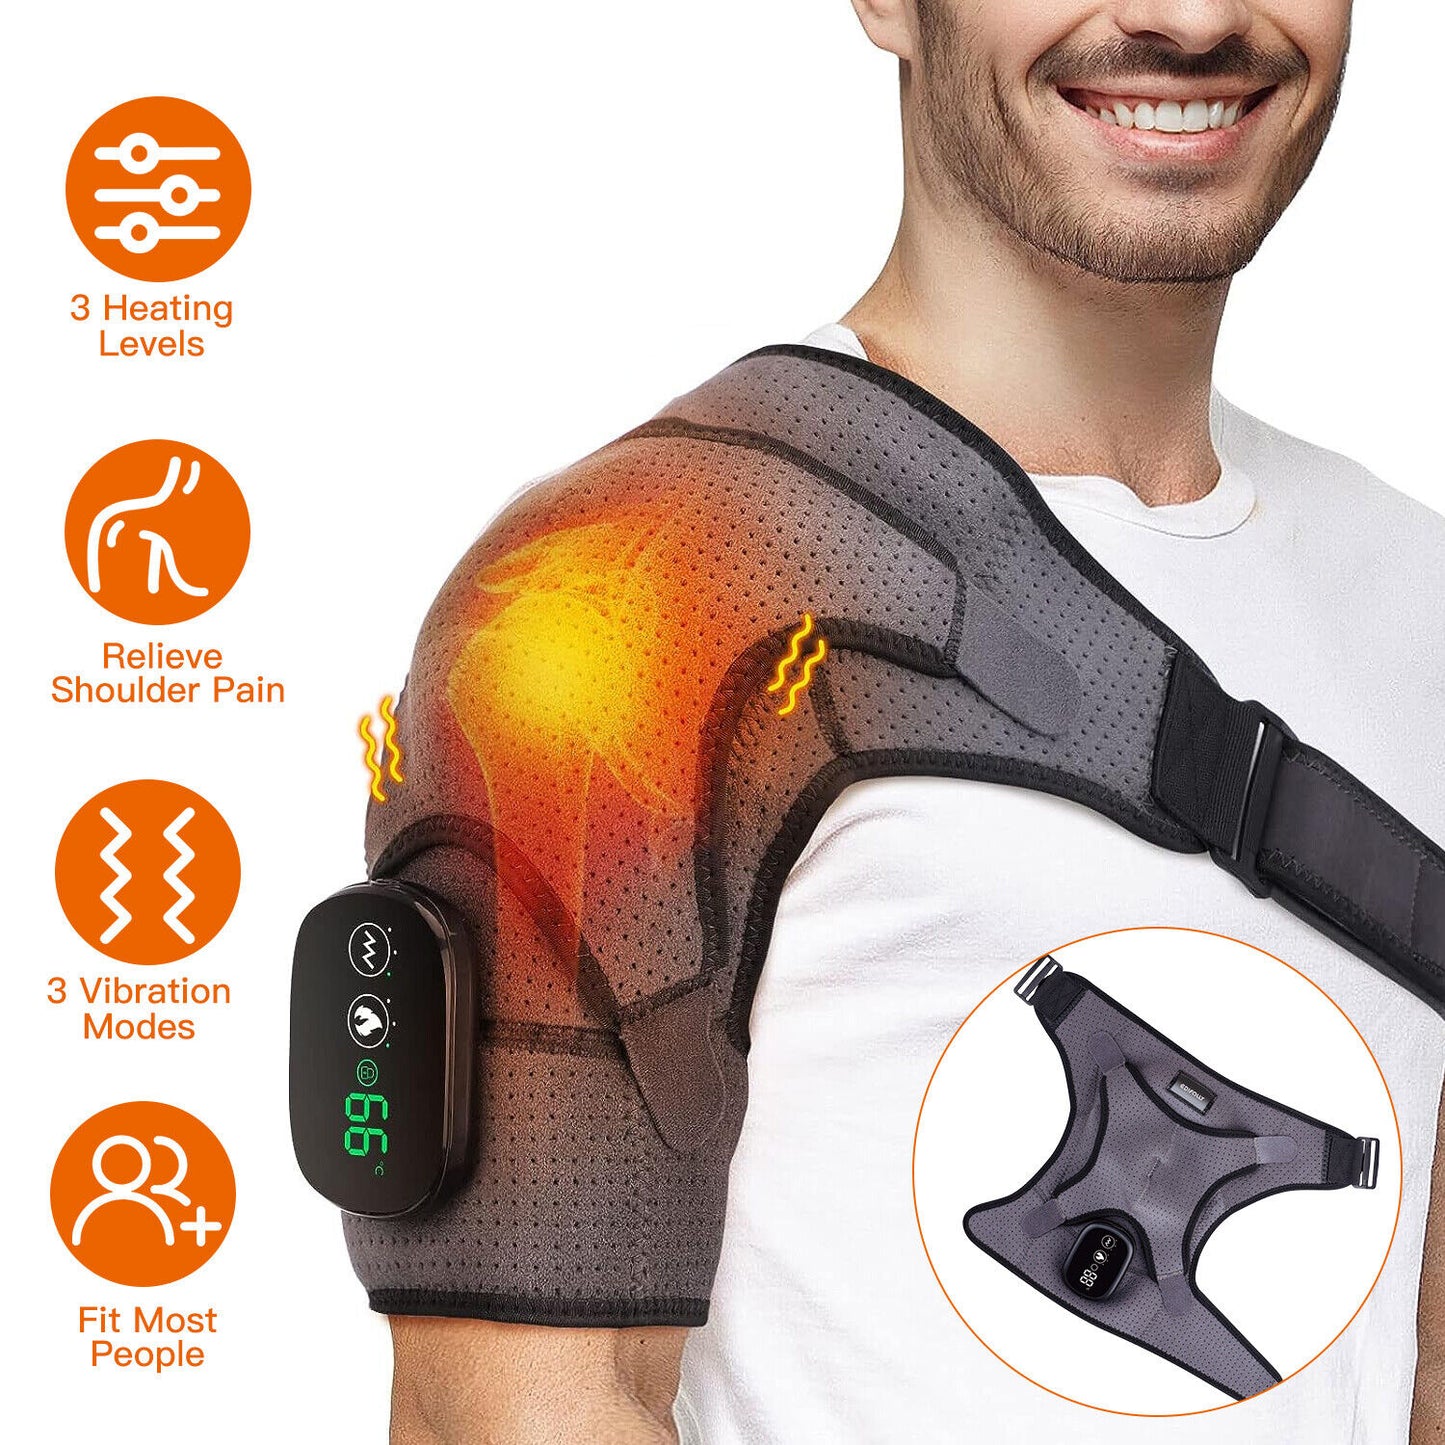 ThermoSoothe™ - The Versatile Heating & Massage Marvel